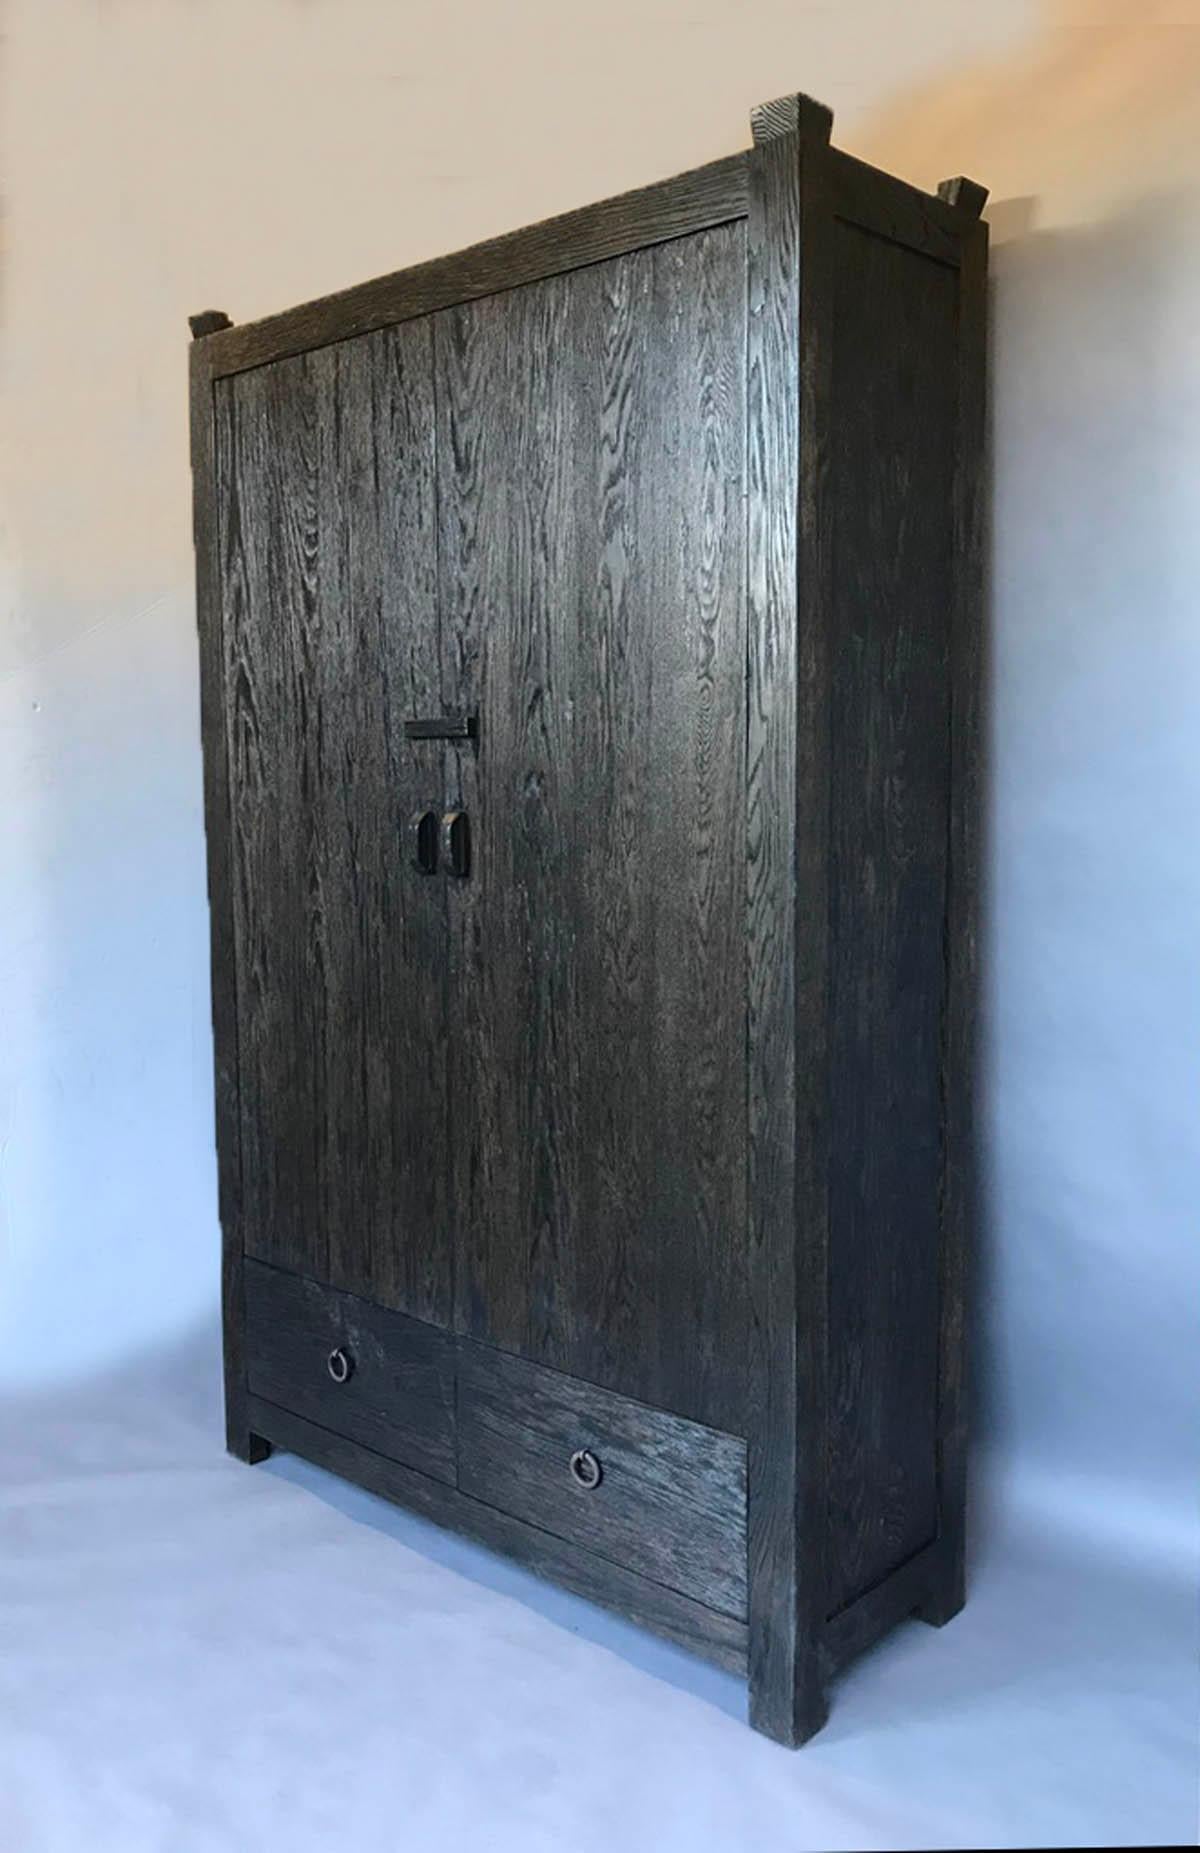 Custom oak cabinet with pocket doors and two large drawers. This cabinet is made to client's specifications and can be made in any size, configuration and finish, with regular doors or pocket doors. Shown here with an open grain and distressed